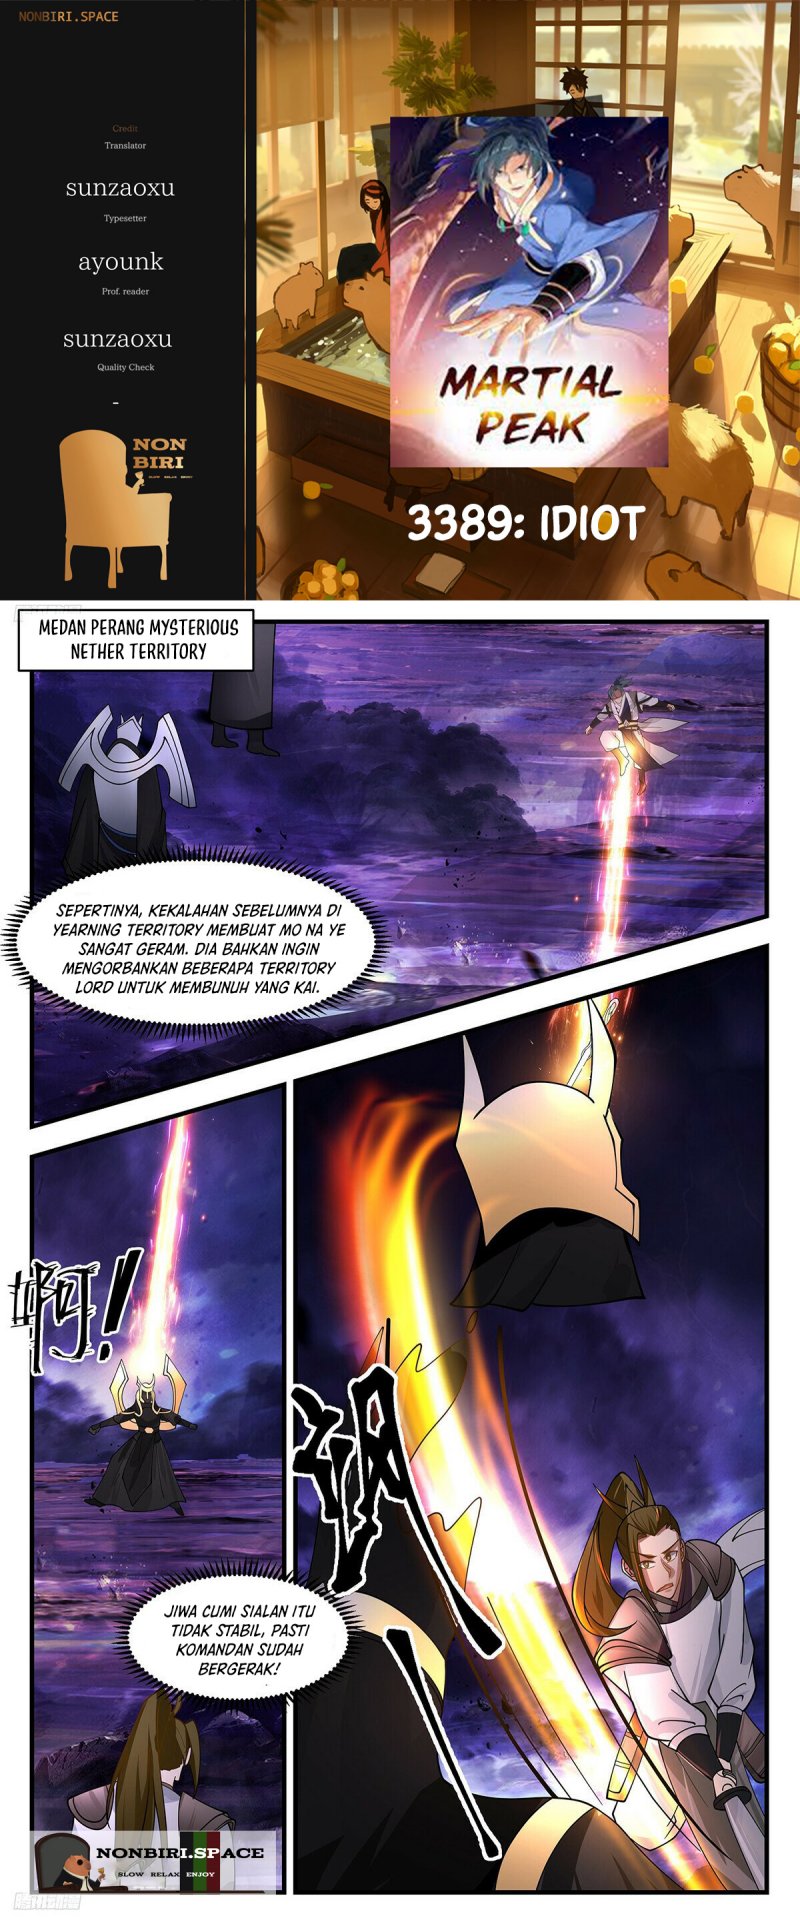 Martial Peak: Chapter 3389 - Page 1